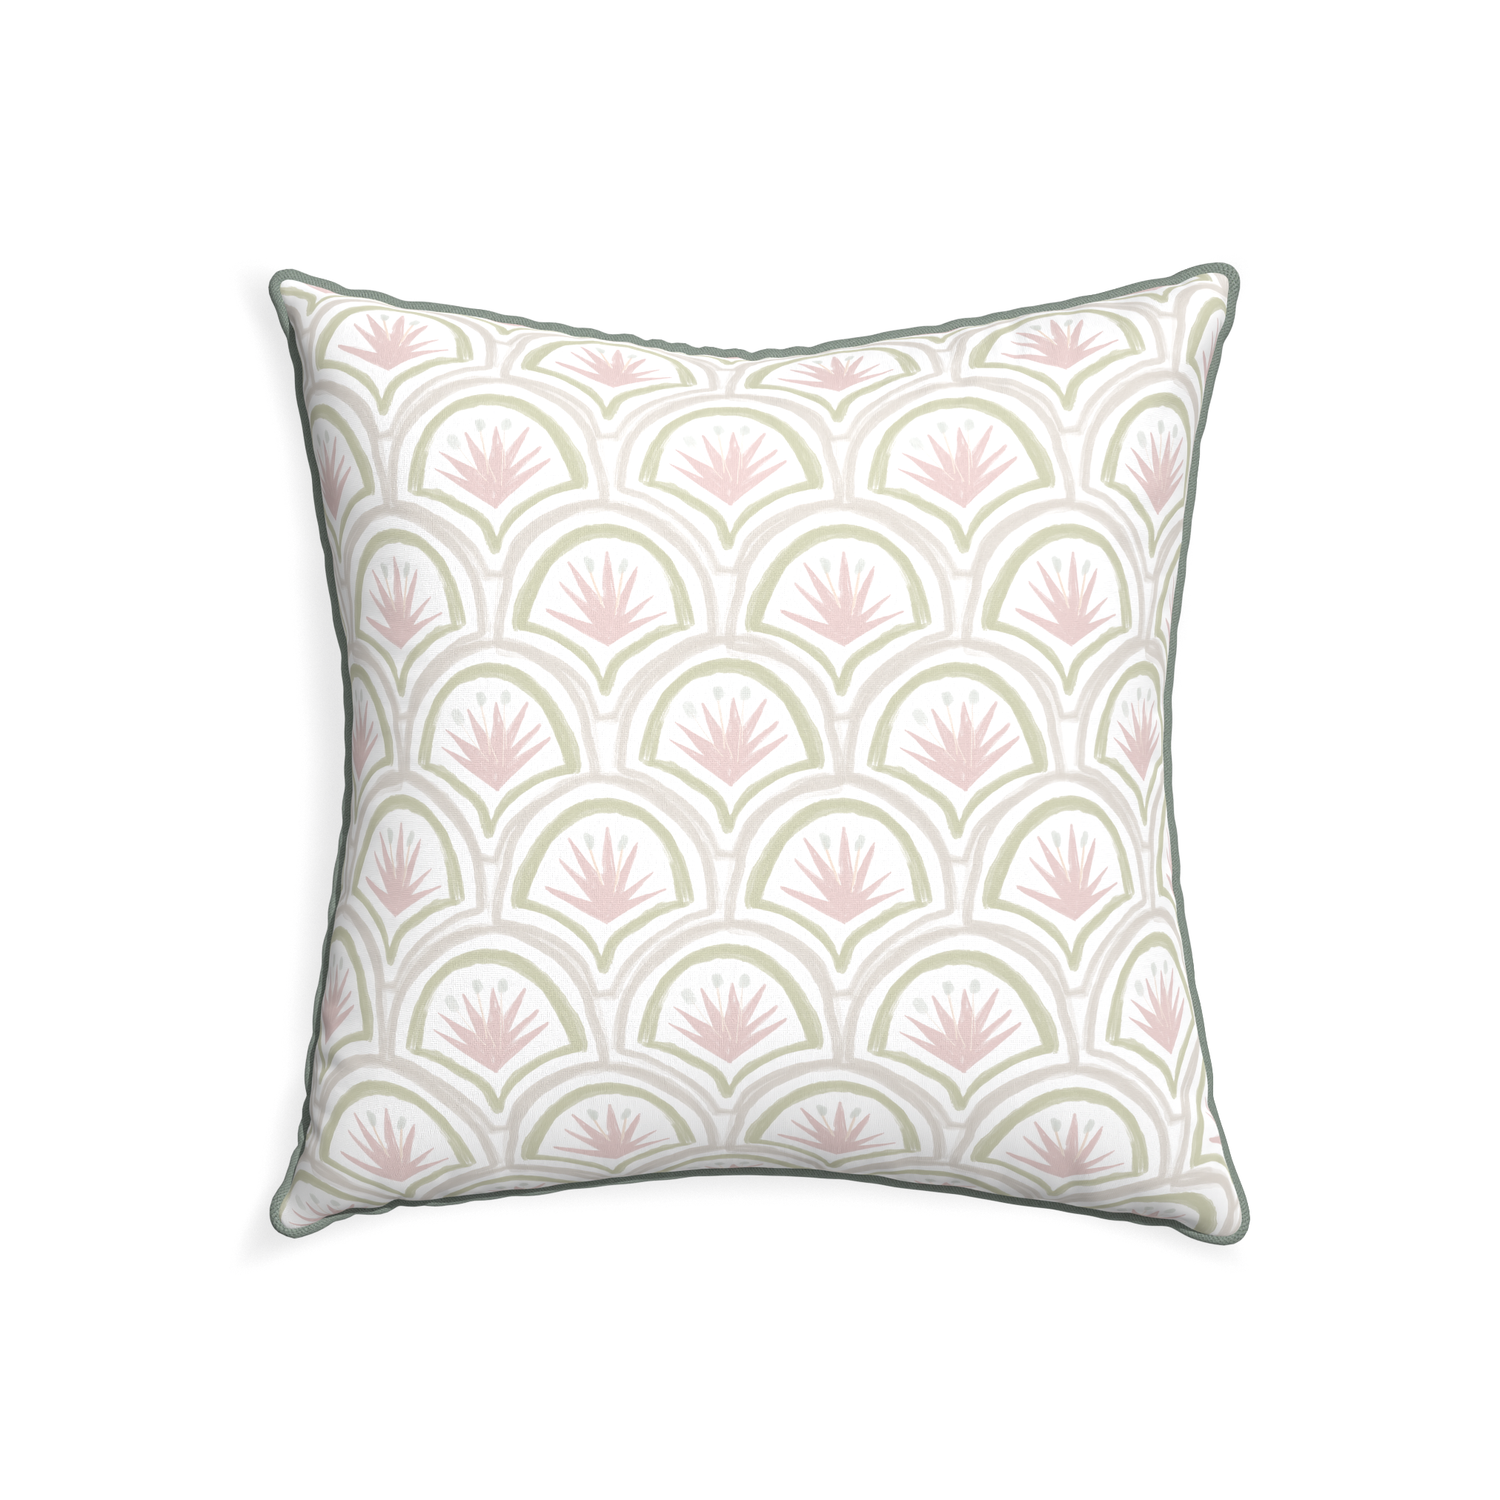 22-square thatcher rose custom pink & green palmpillow with sage piping on white background